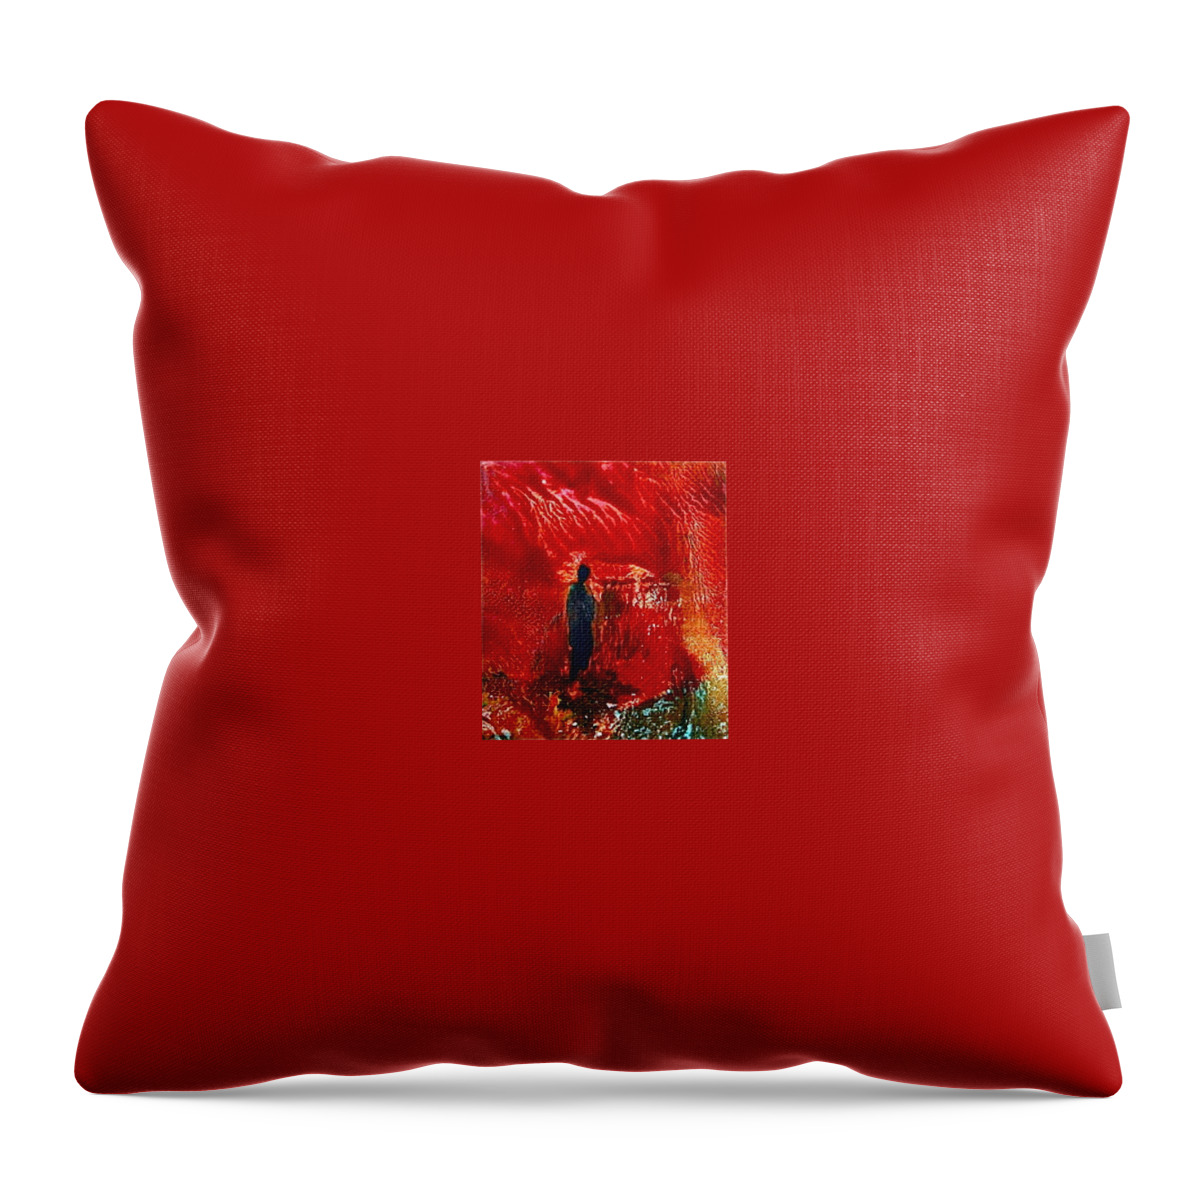 War Throw Pillow featuring the painting The American War by Janice Nabors Raiteri